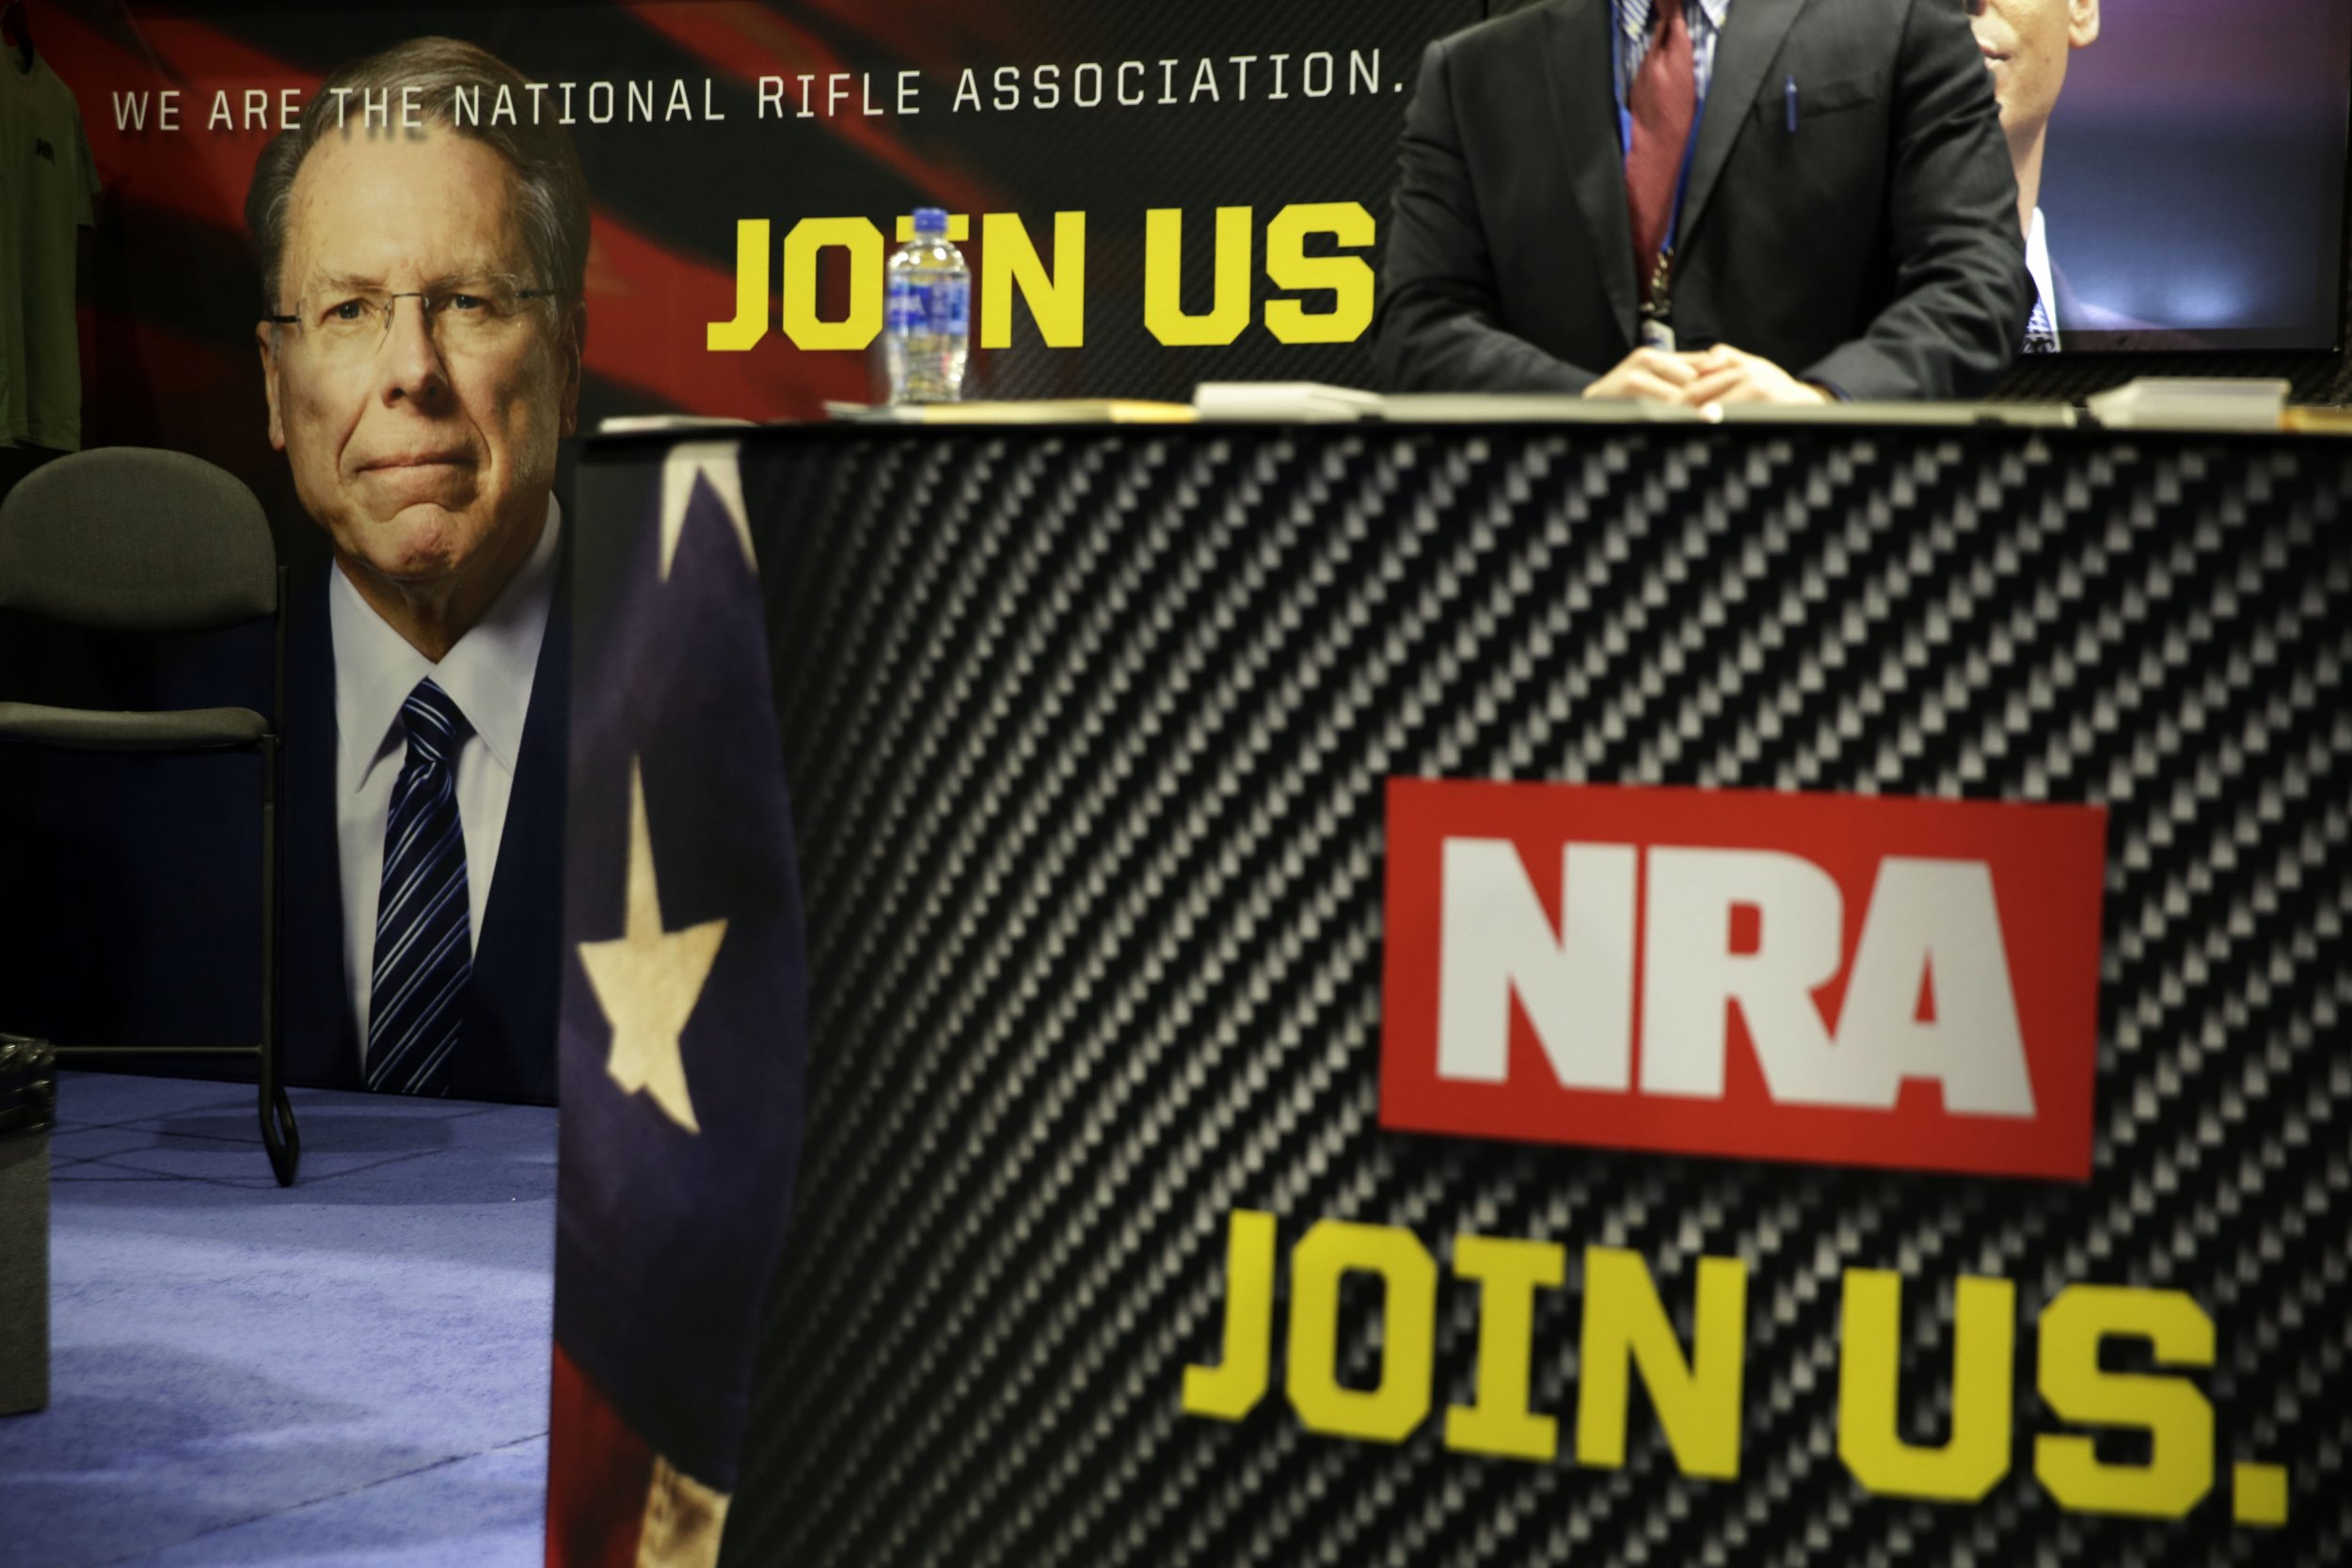 NRA connecticut